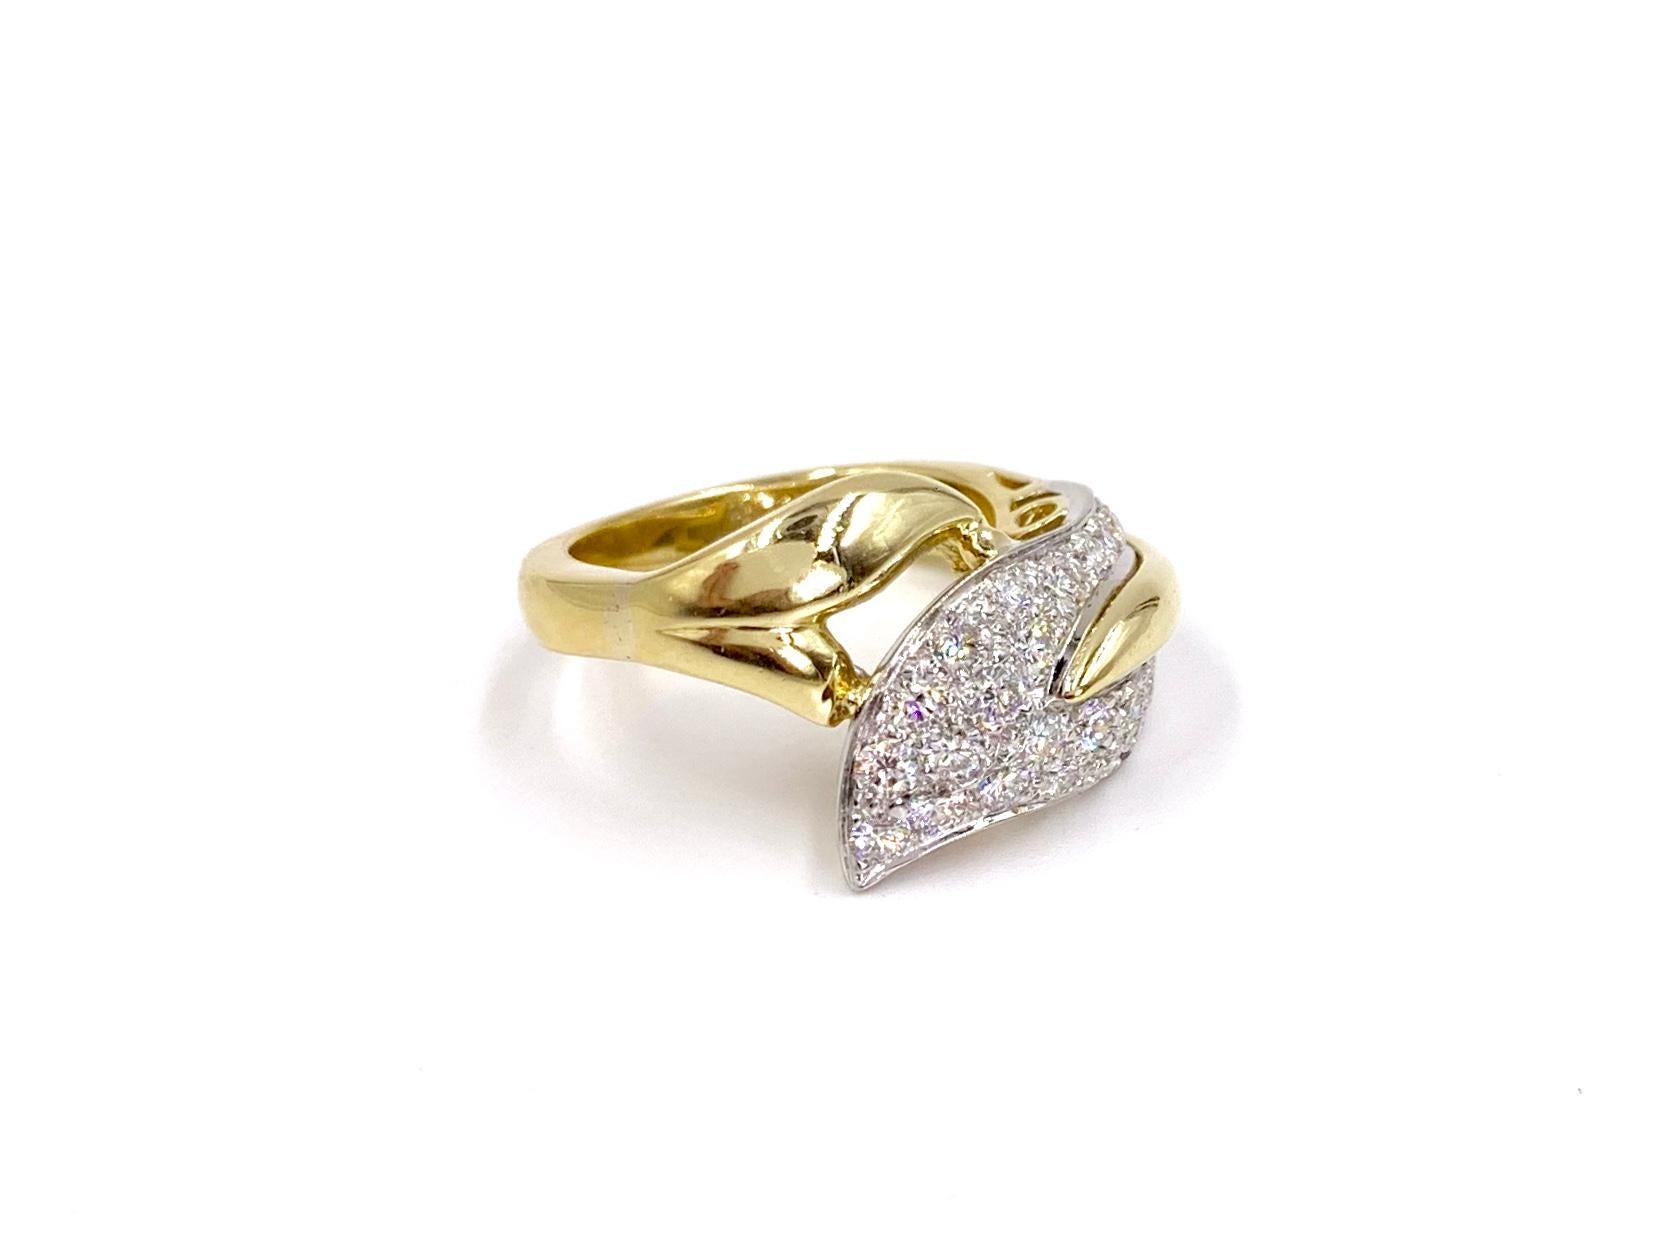 A wearable contemporary 18 karat yellow gold wrap around leaf ring containing 2.25 carats of high quality round brilliant diamonds. Diamond quality is approximately F-G color, VS2 clarity and beautifully set in white gold prongs for an extra bright